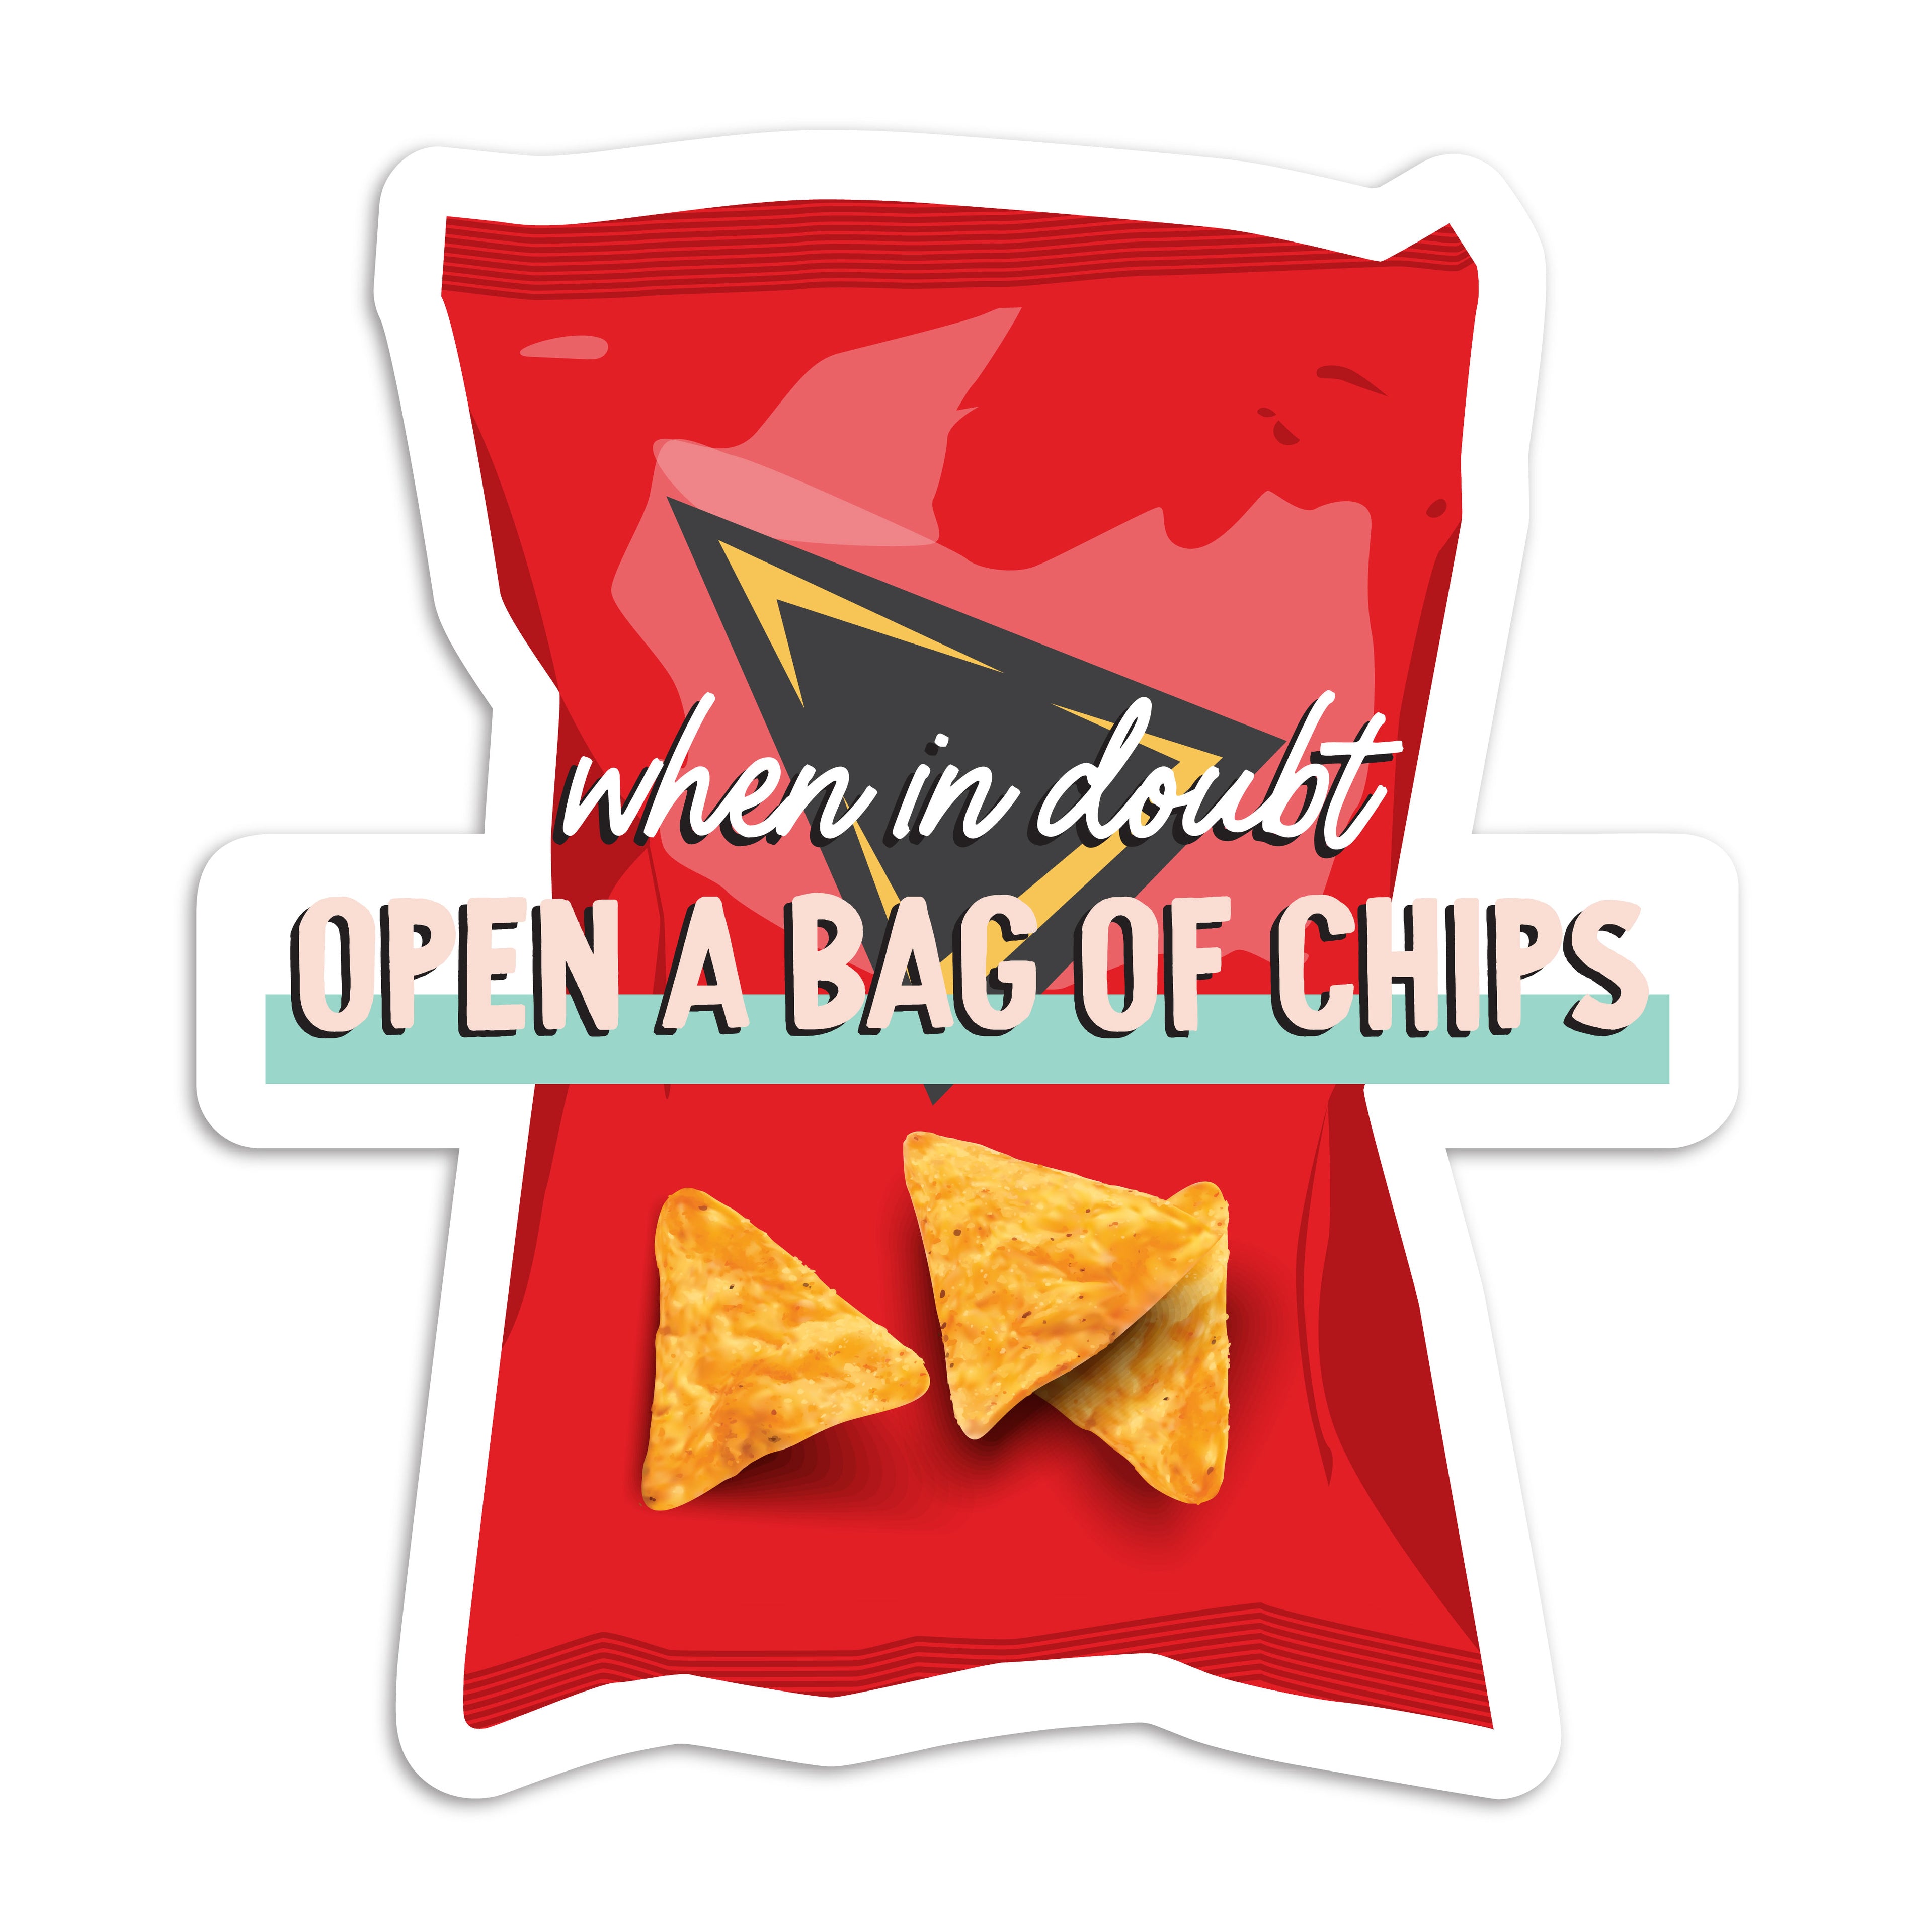 When in doubt open a bag of chips vinyl sticker by I&